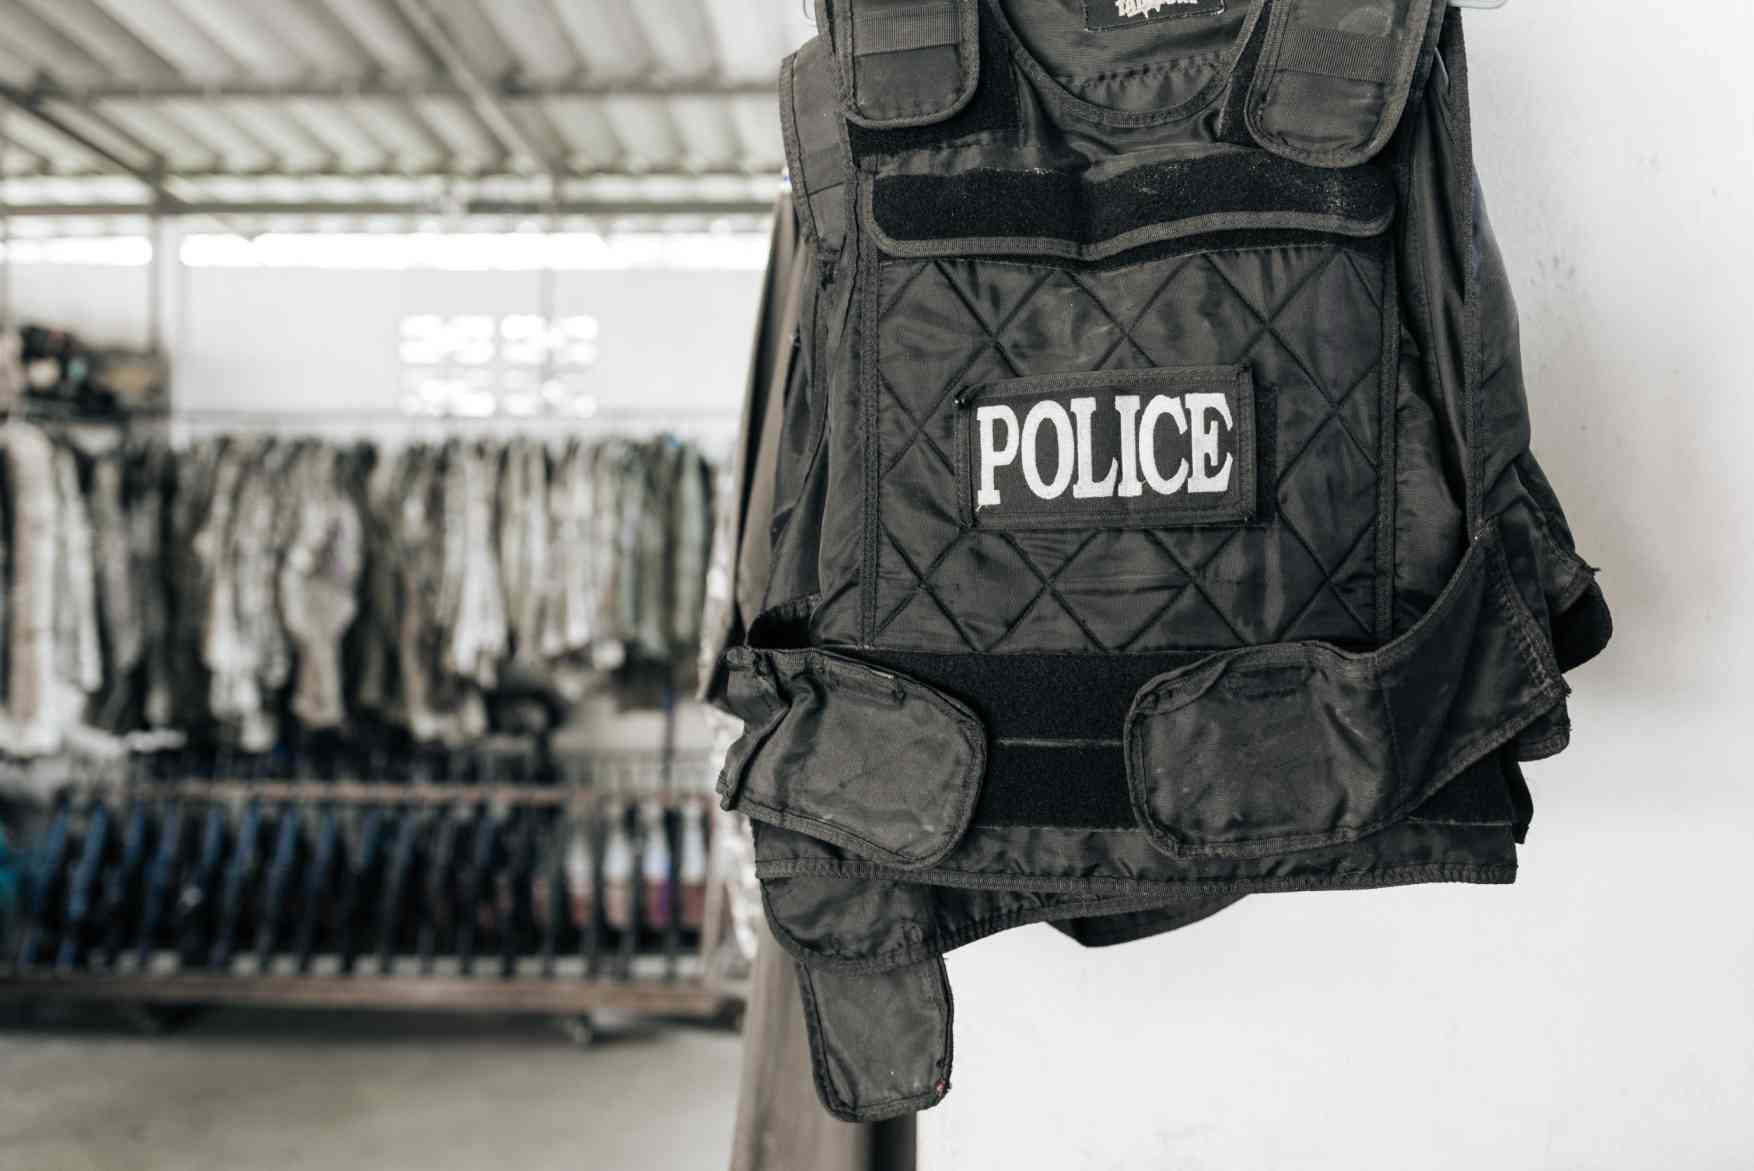 Body Armor vs Plate Carrier vs Bulletproof Vests - What Are The Differences?